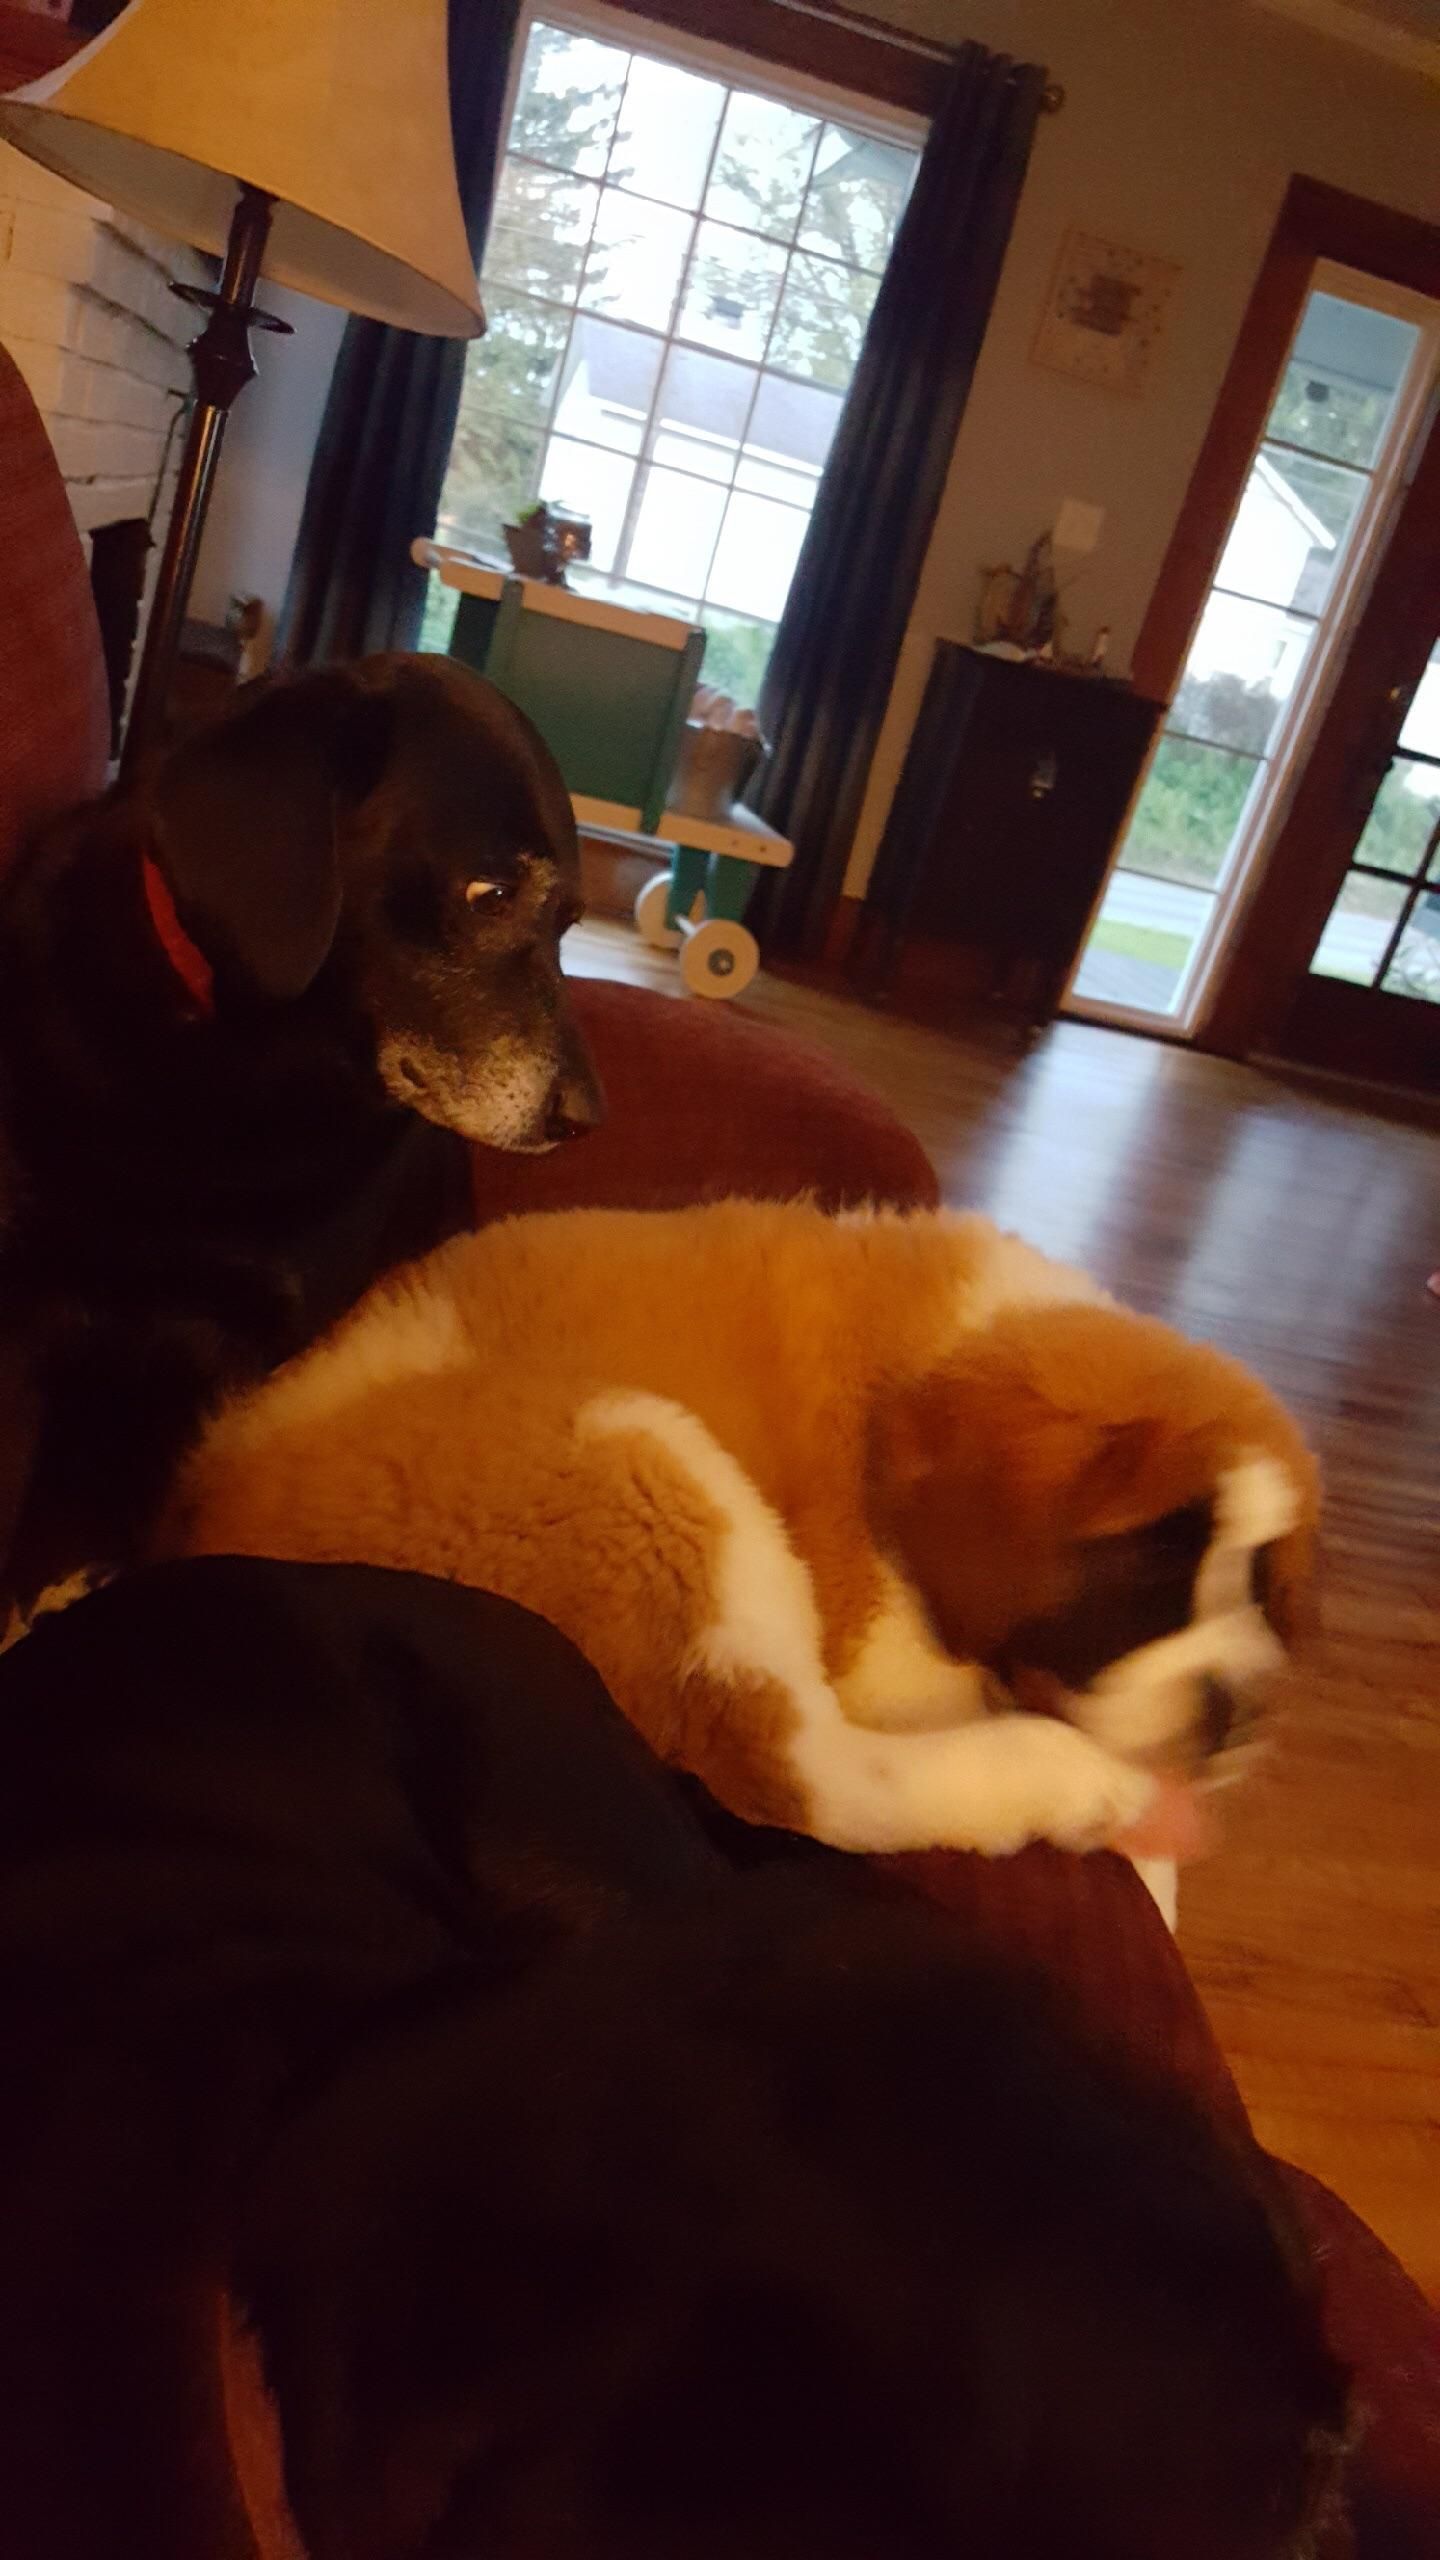 Girlfriend’s mom brought home a new dog today.. the older dog she had isn’t too pleased.